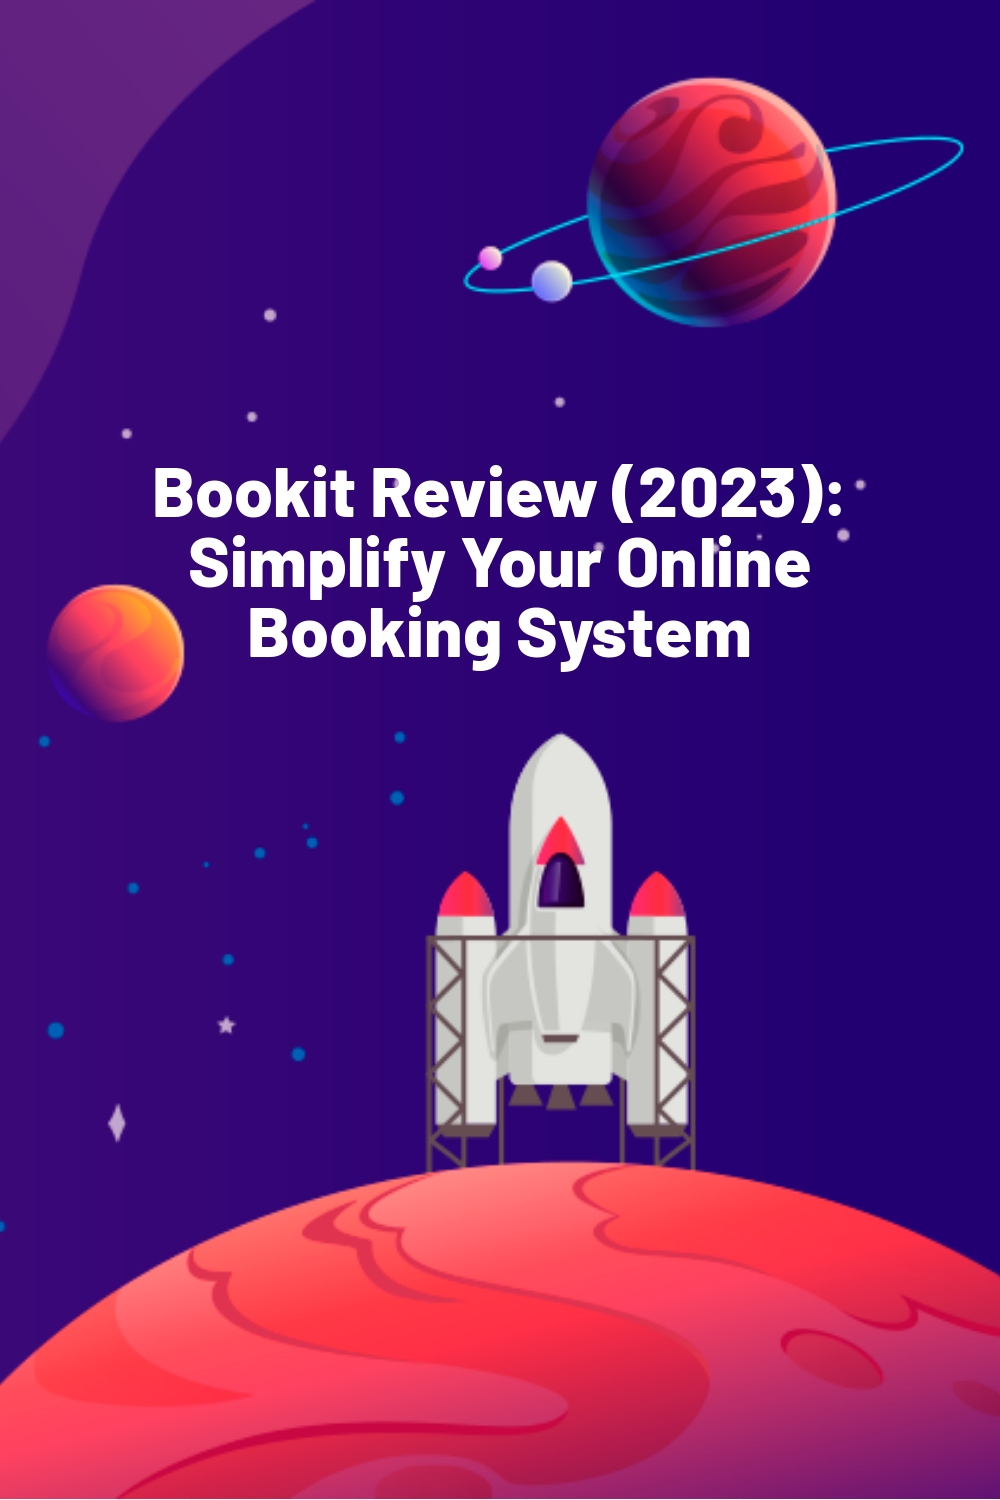 Bookit Review (2023): Simplify Your Online Booking System